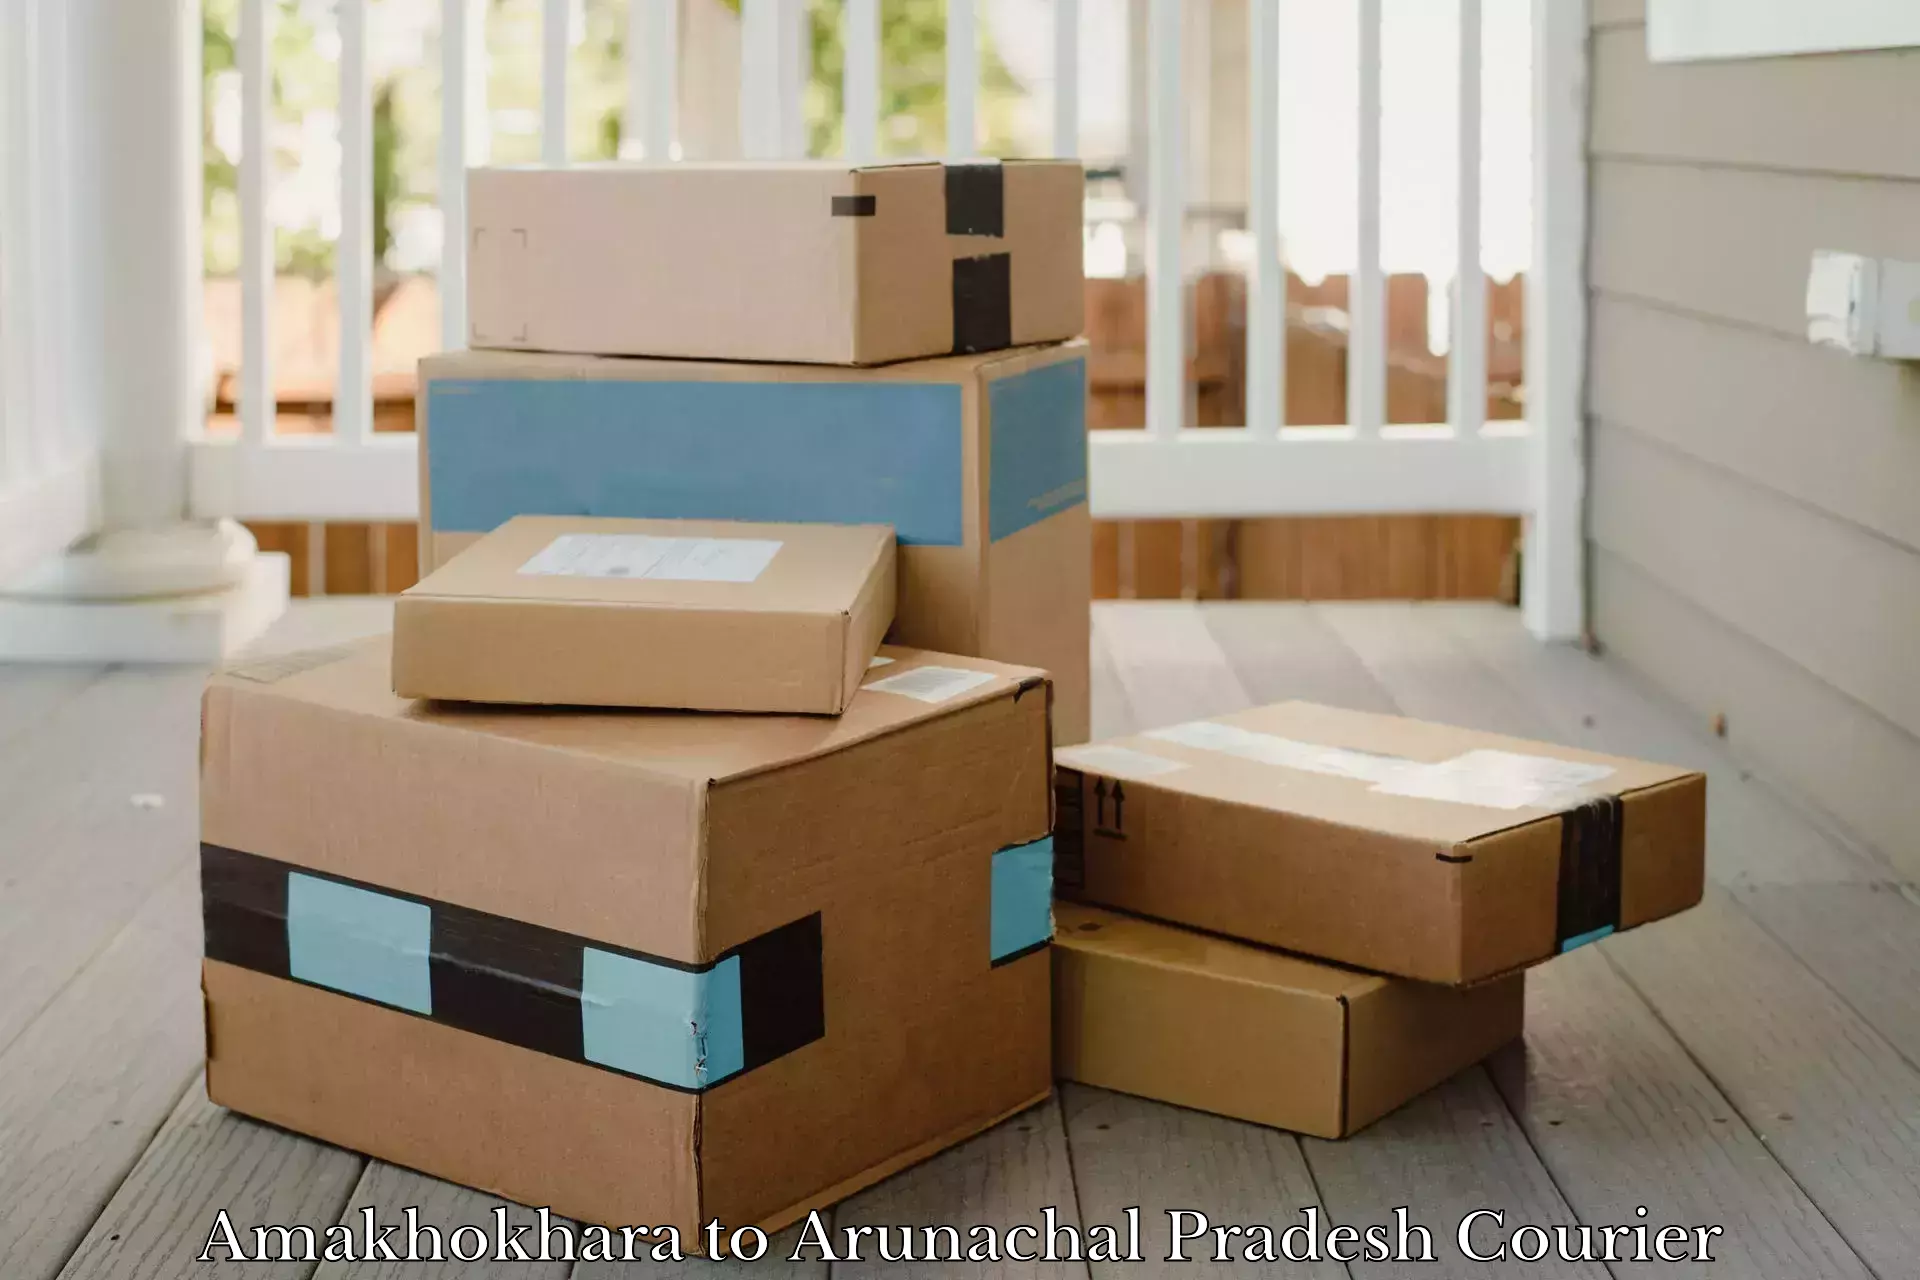 Reliable parcel services in Amakhokhara to Tezu